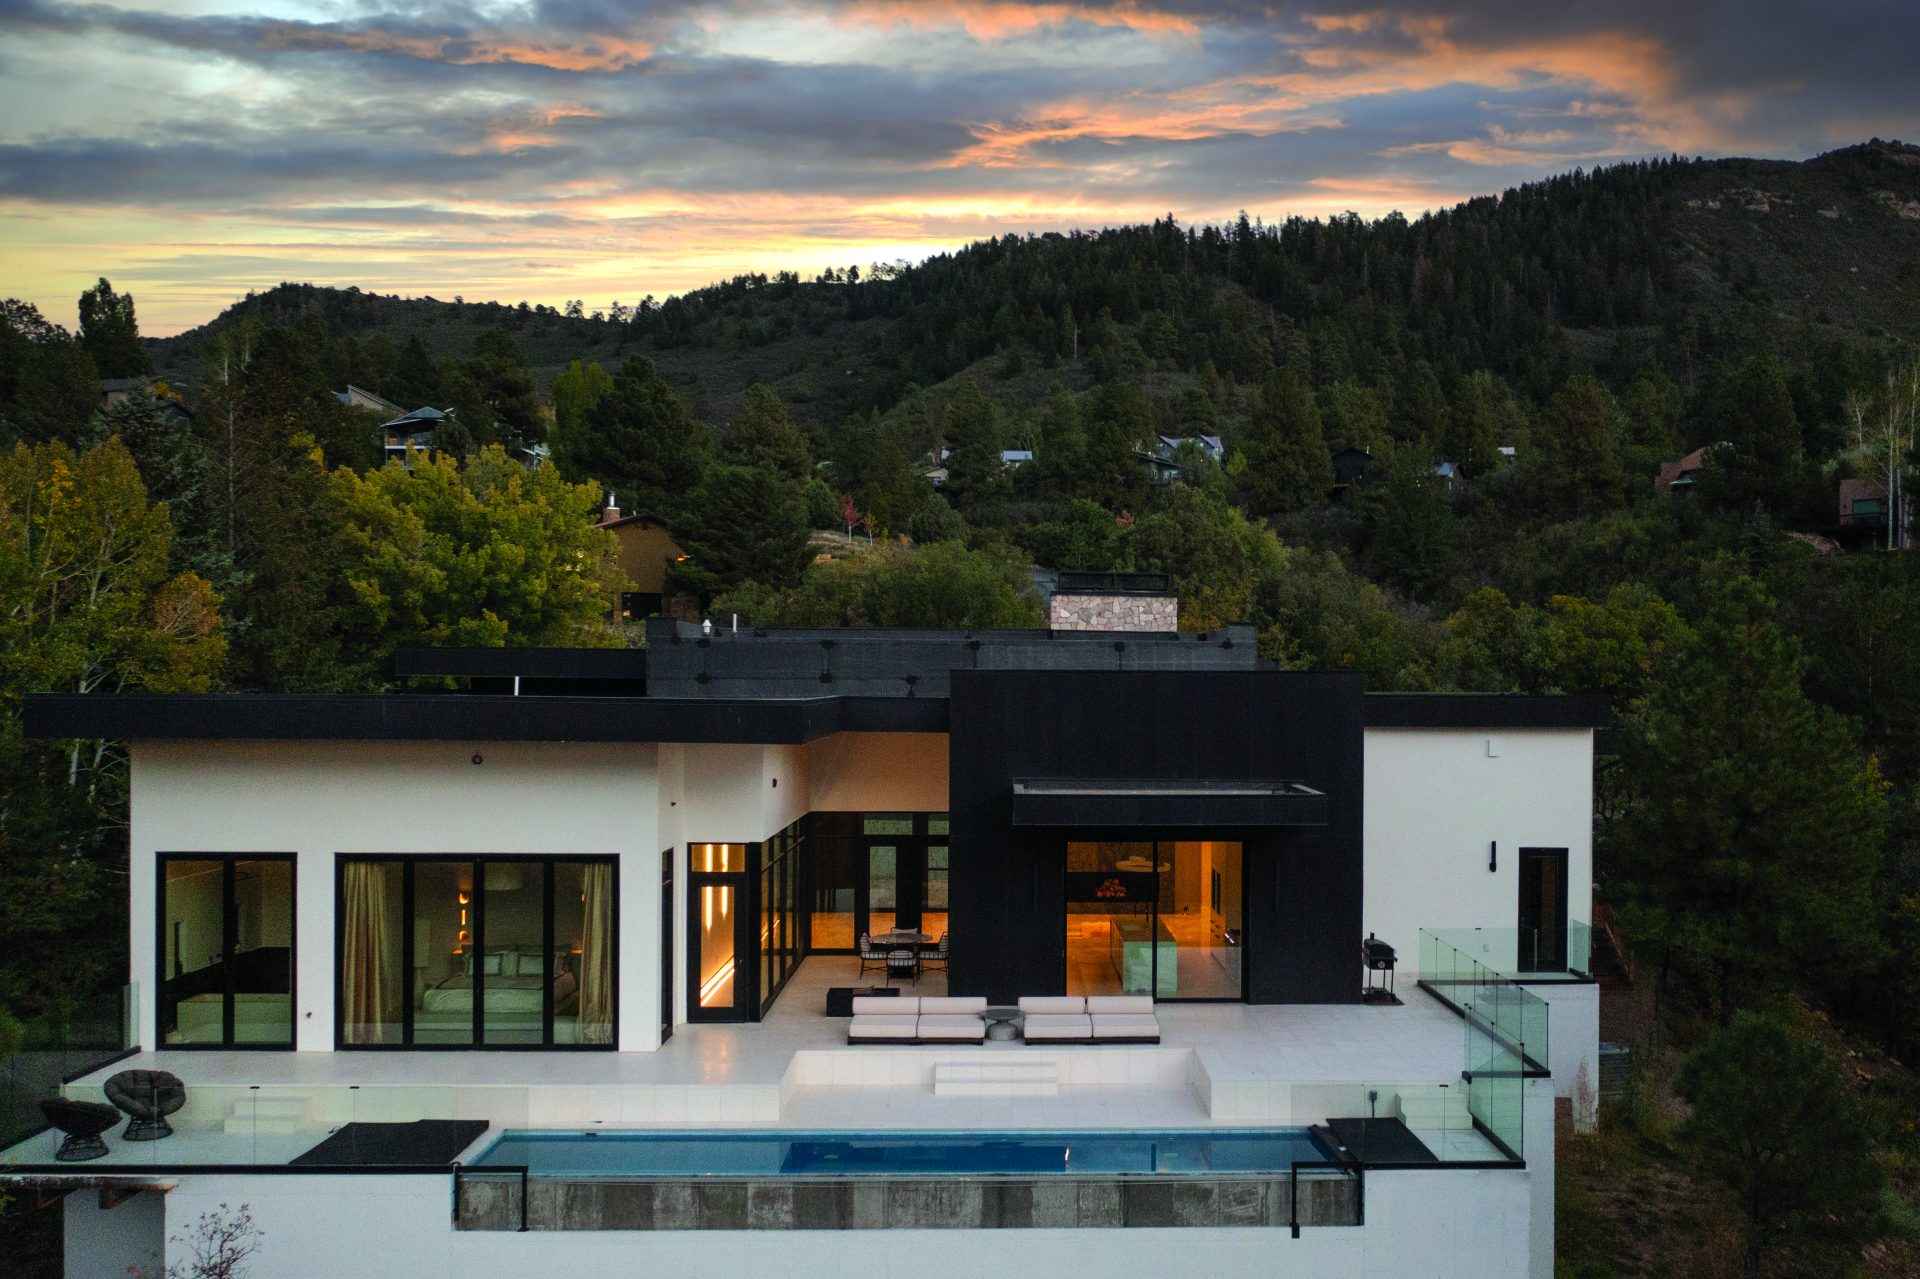 A Modern Masterpiece That Takes Mountain Living to a New Level